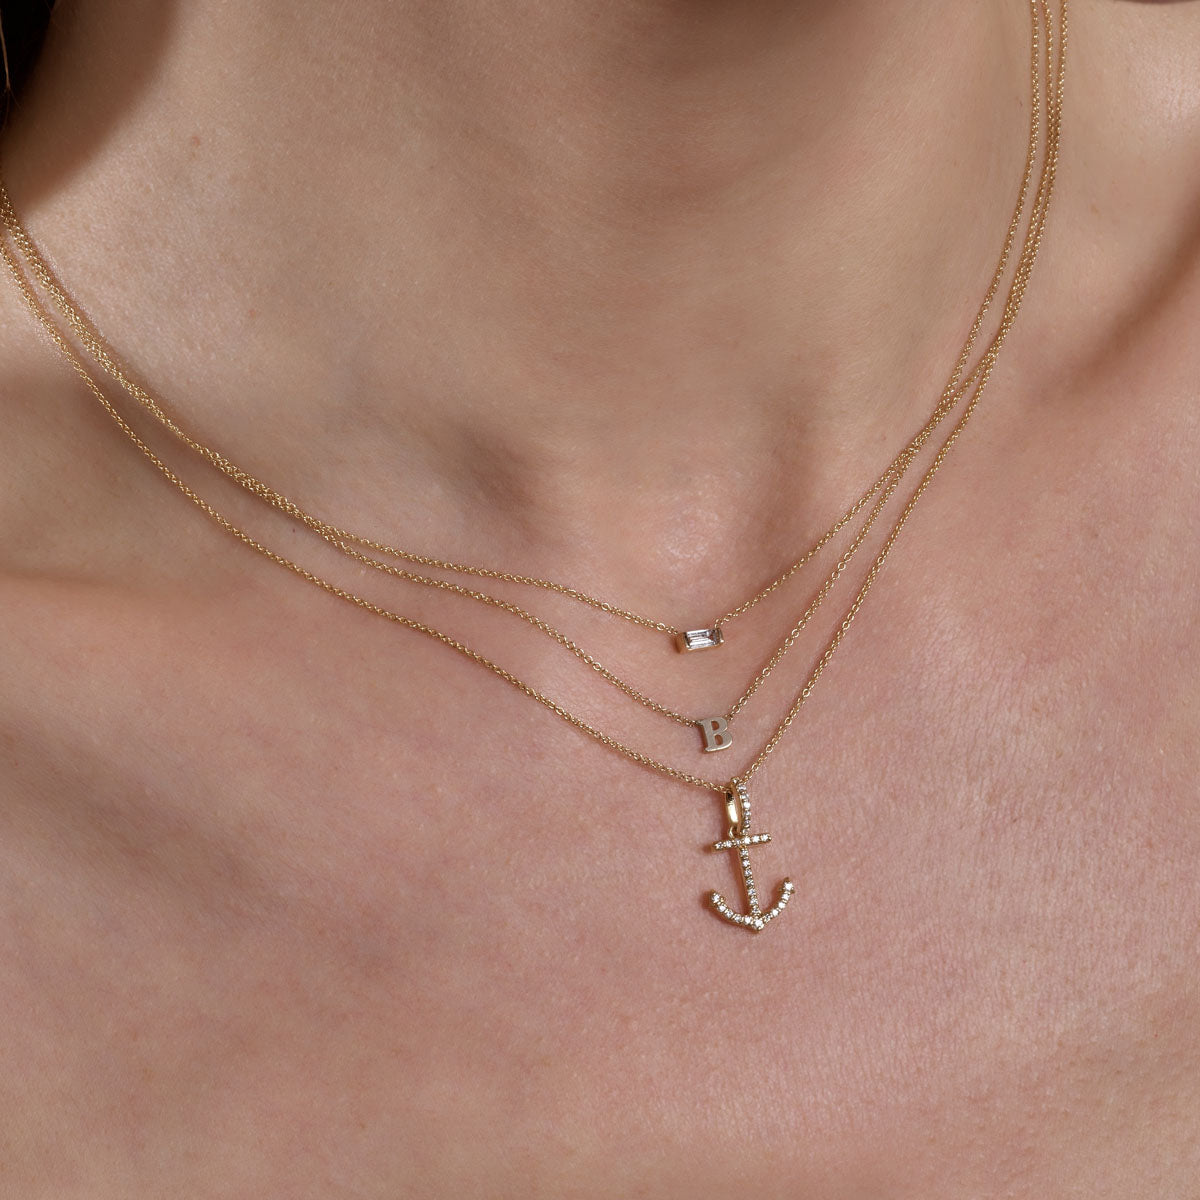 Layered personalized gold necklaces - diamond rectangle, initial, and anchor charms on woman's neck